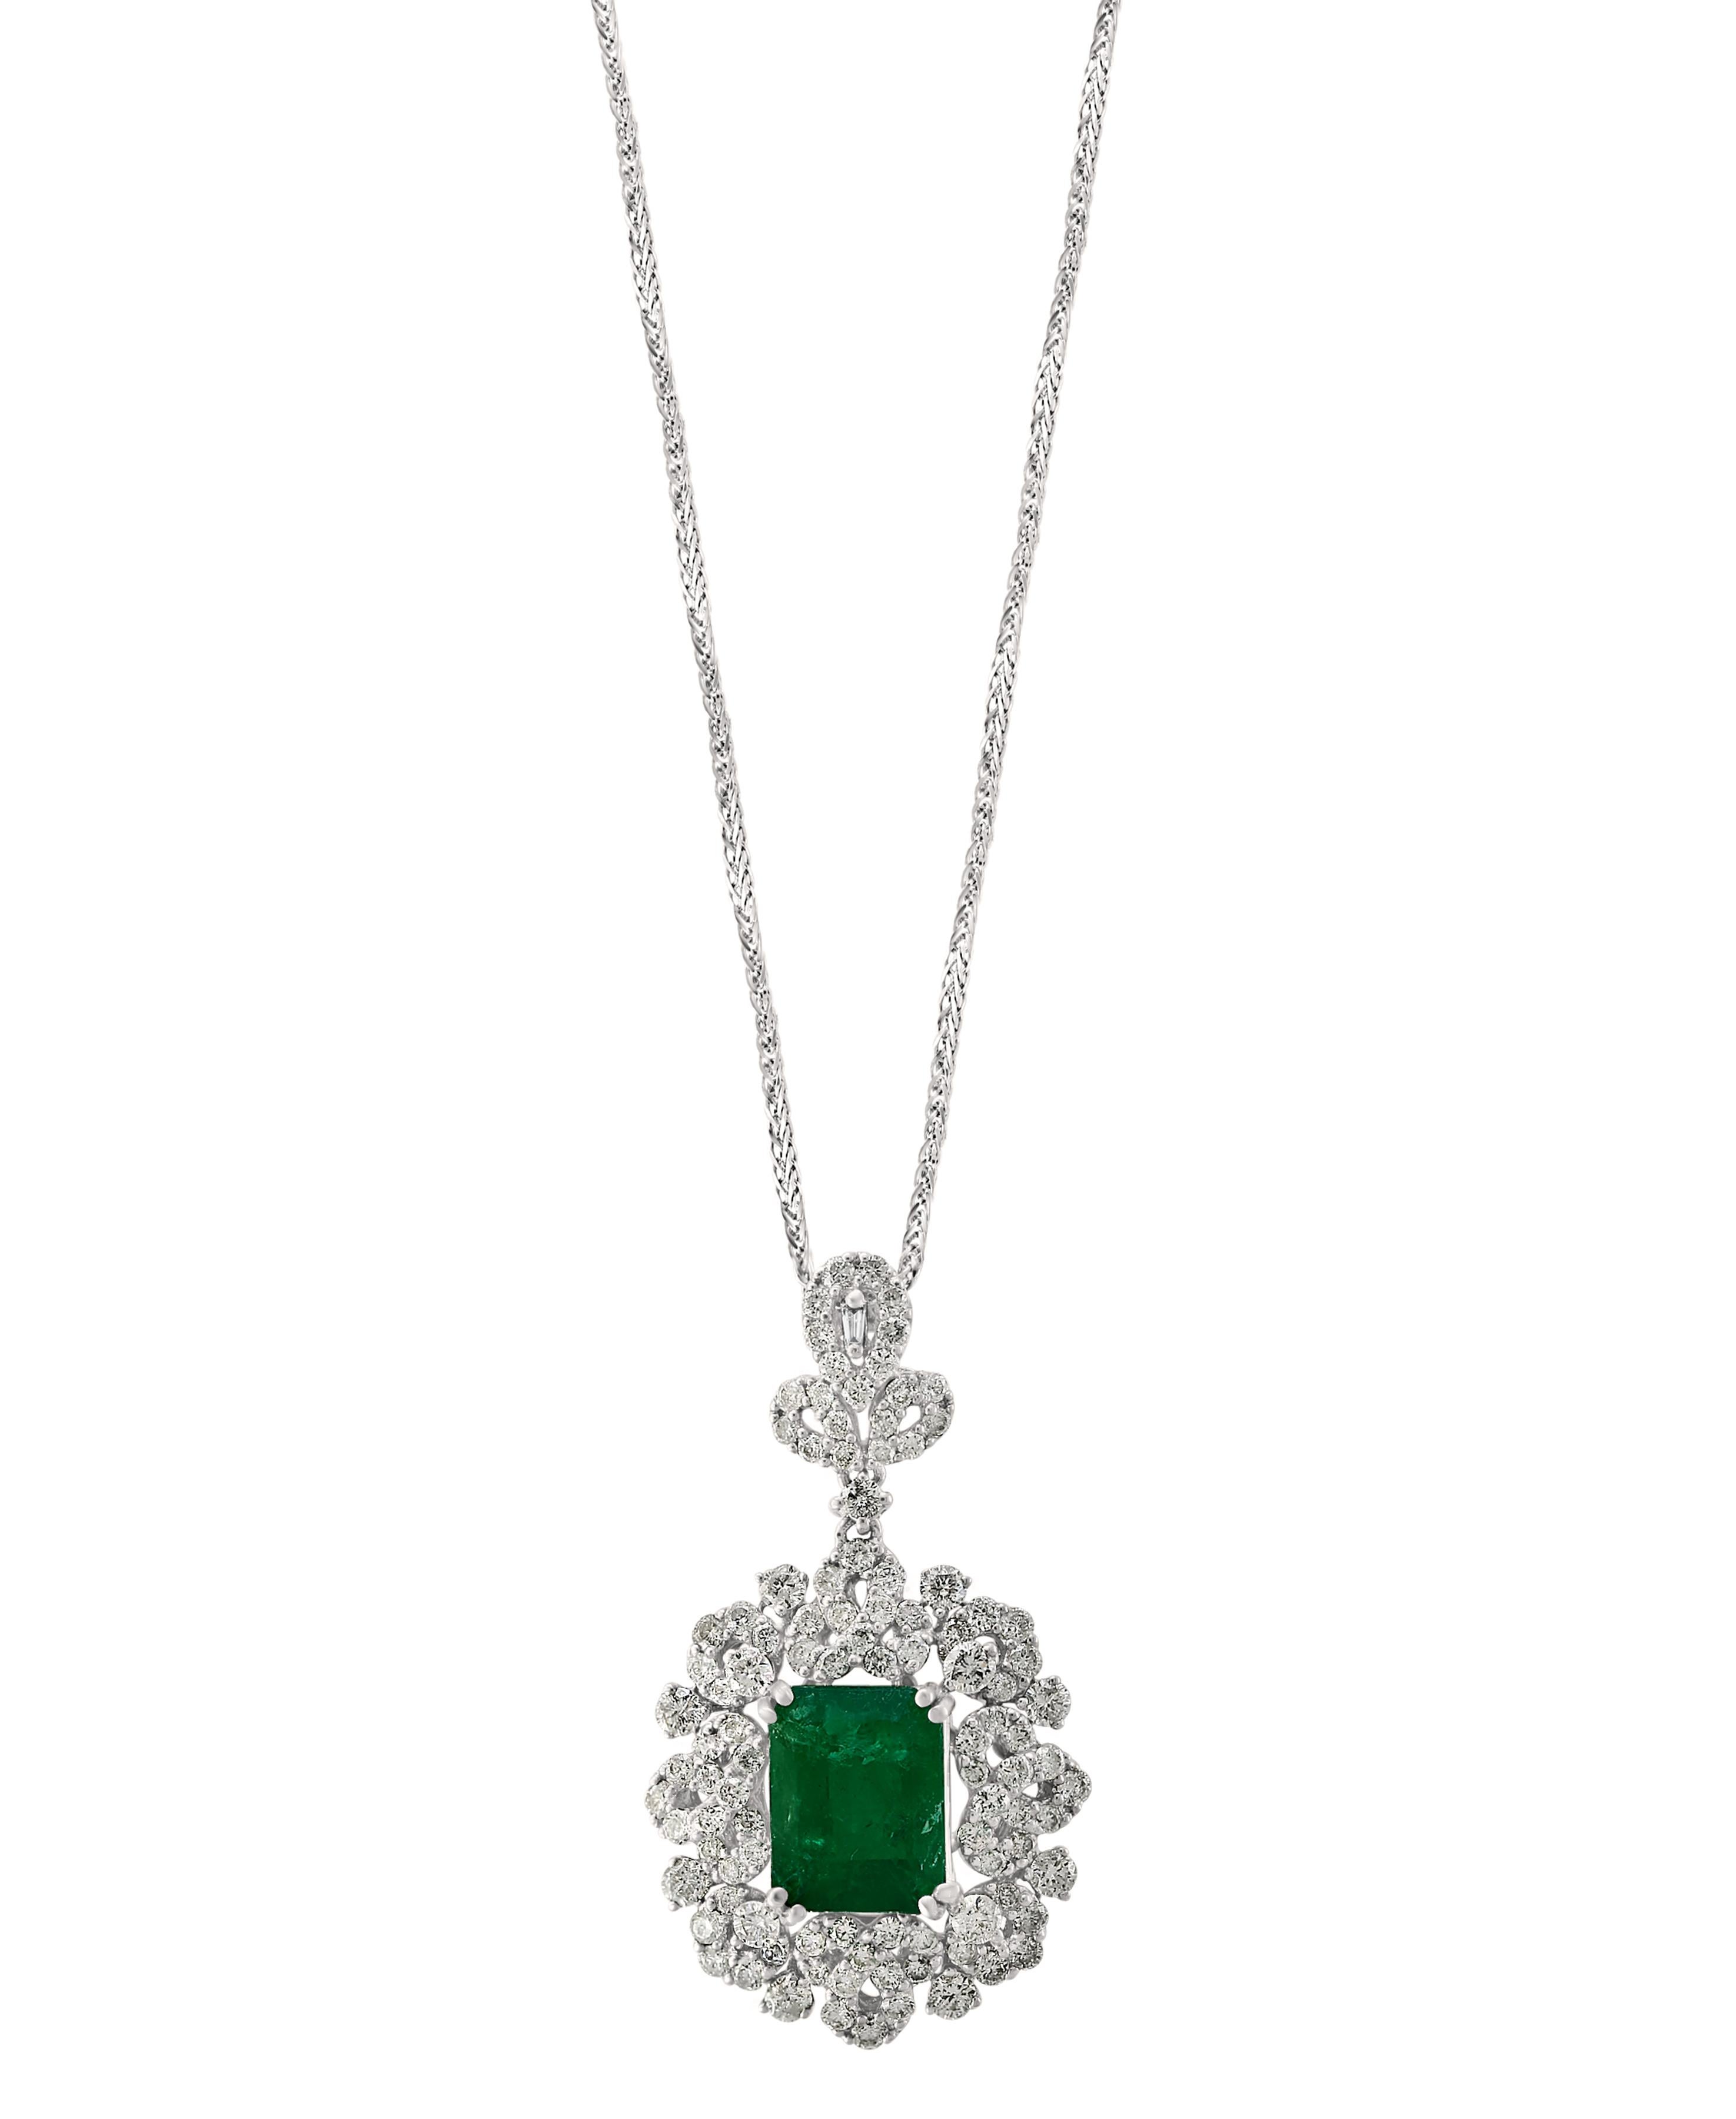 Approximately 4 Carat Emerald Cut Emerald and Diamond Pendant Necklace Enhancer
This spectacular Pendant Necklace consisting of a single Emerald cut emeralds approximately 4 Carat. The Emerald is surrounded by approximately 2 Carats of brilliant cut